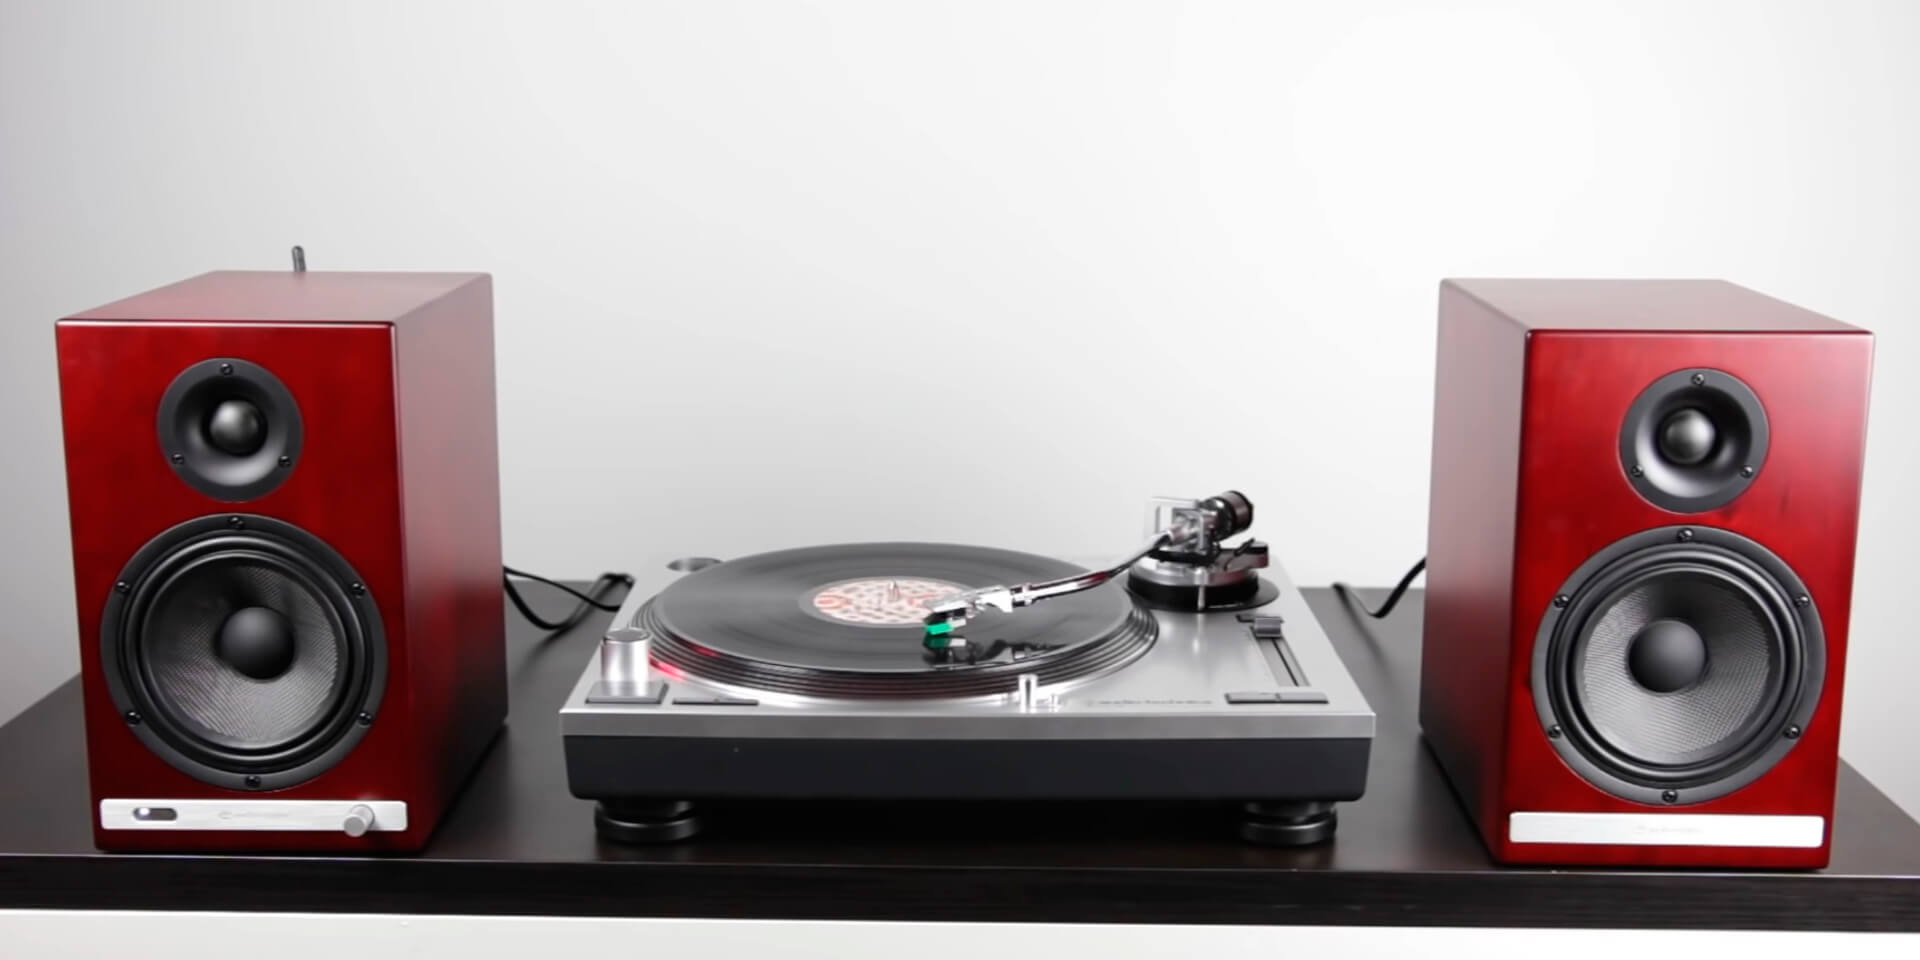 Audio-Technica AT-LP60X Turntable and Edifier R1280T Active Speaker Bu